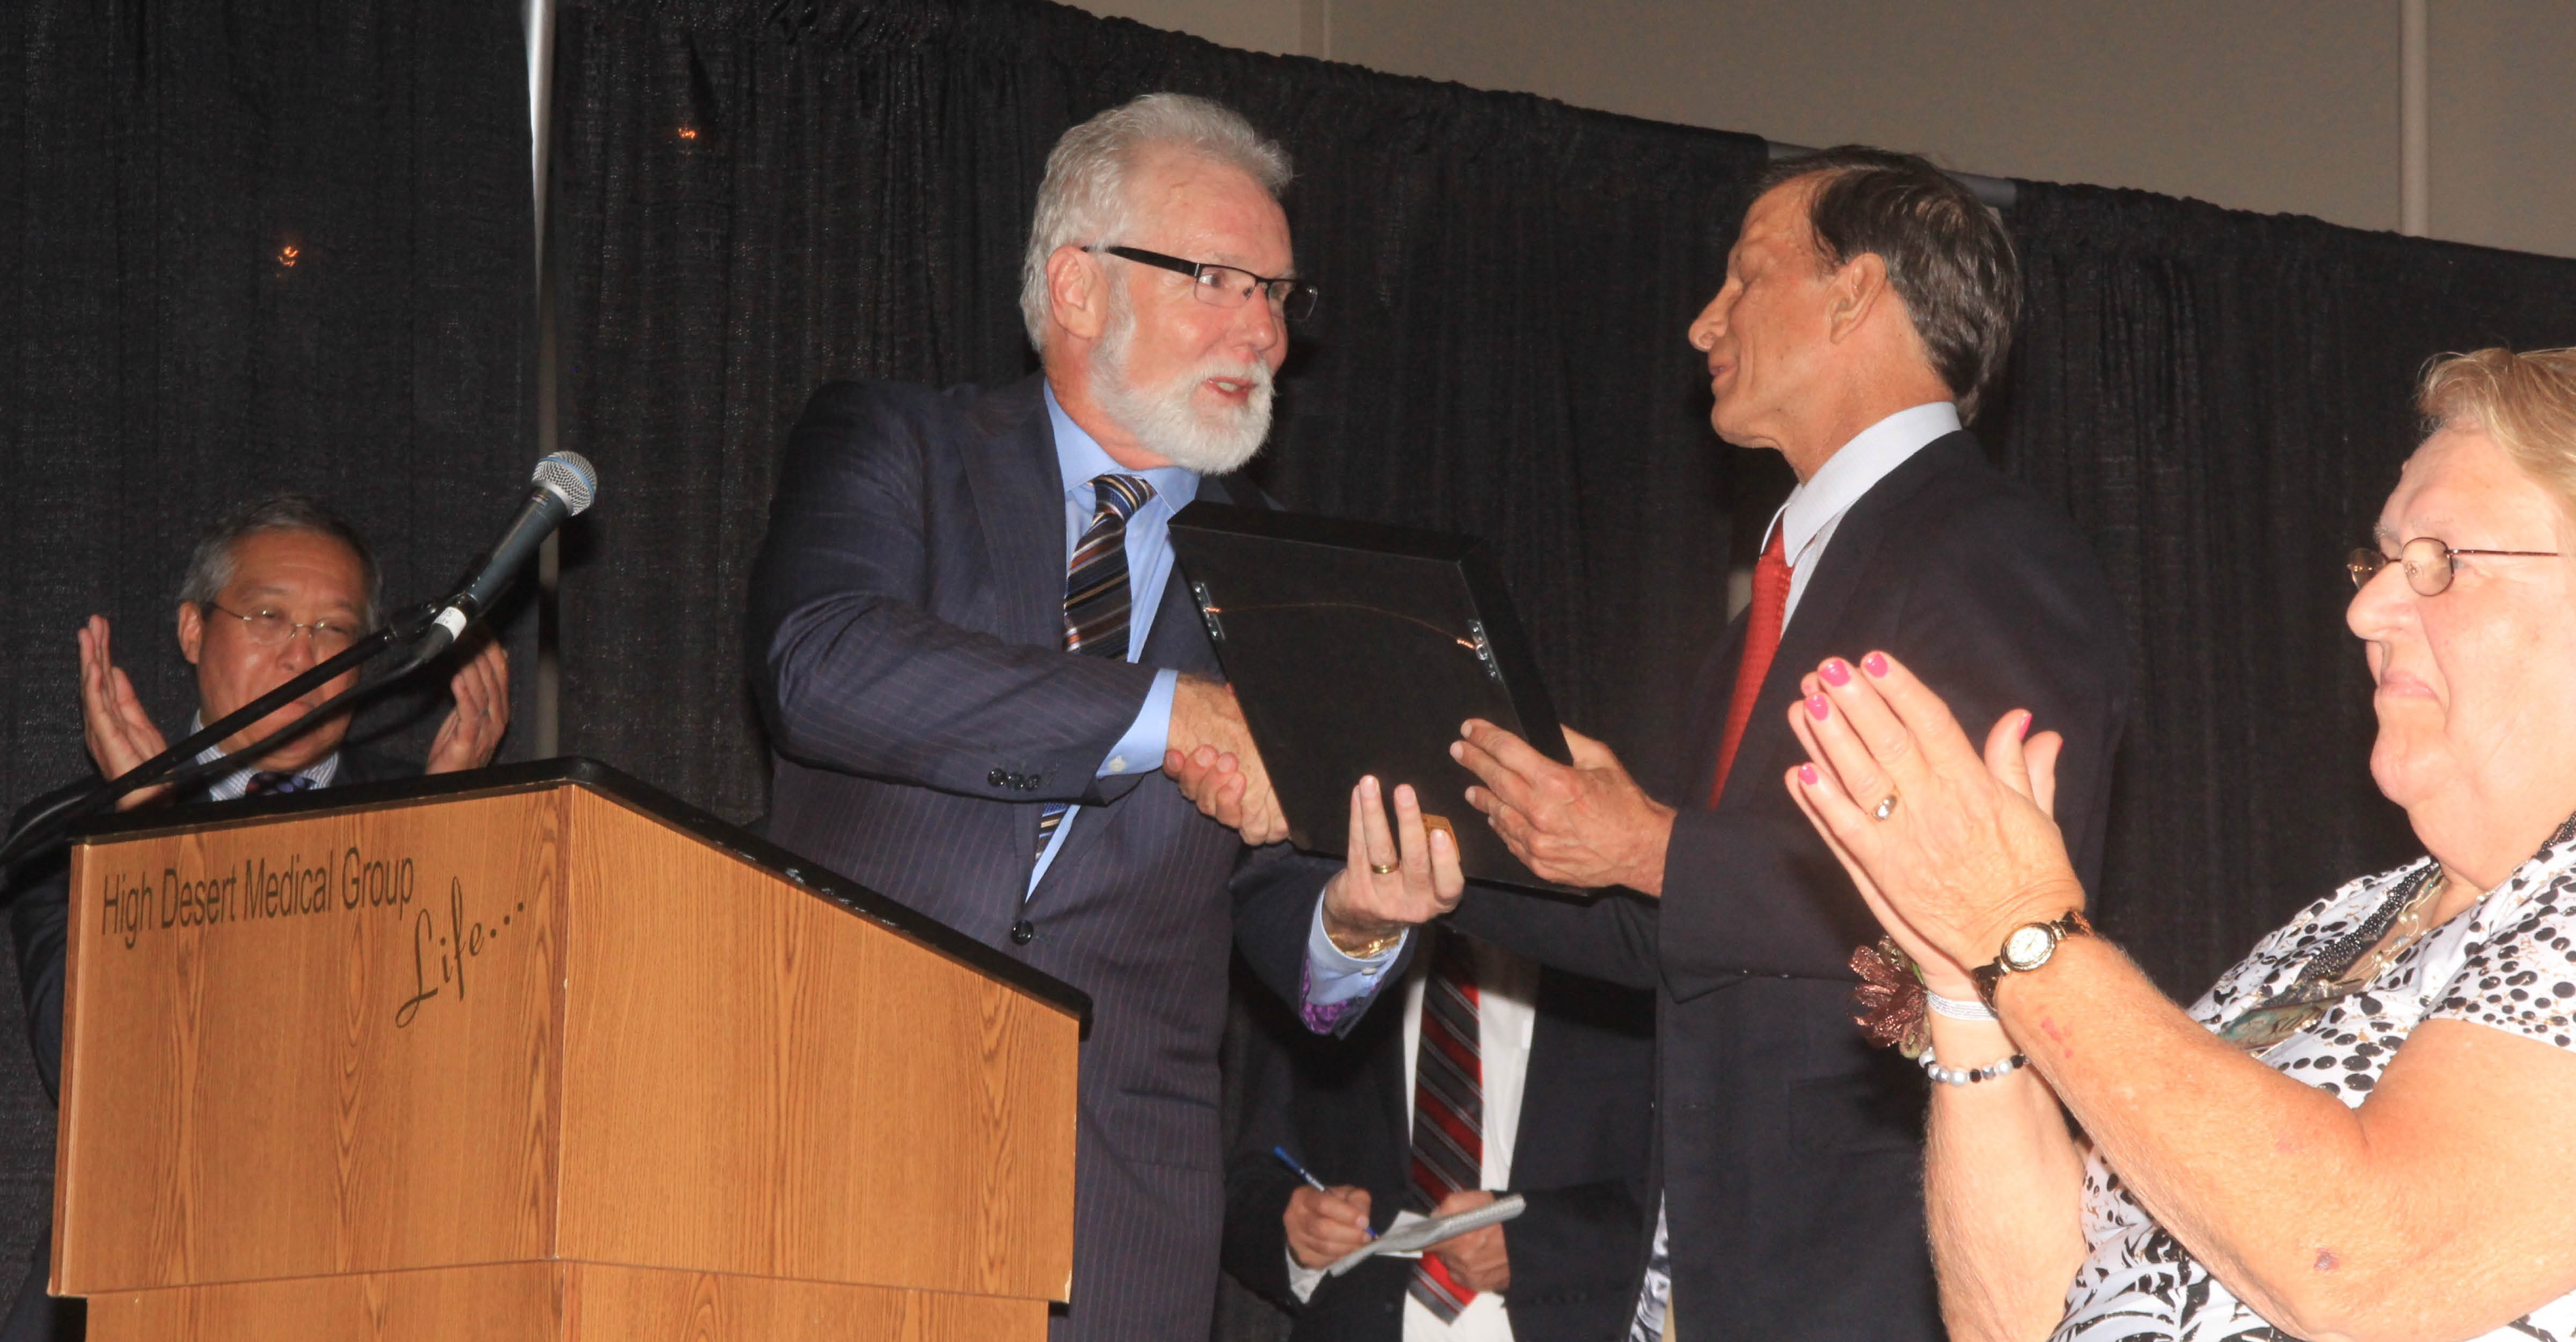 Mayor Rex Parris gives Dr. Merkin key to the City